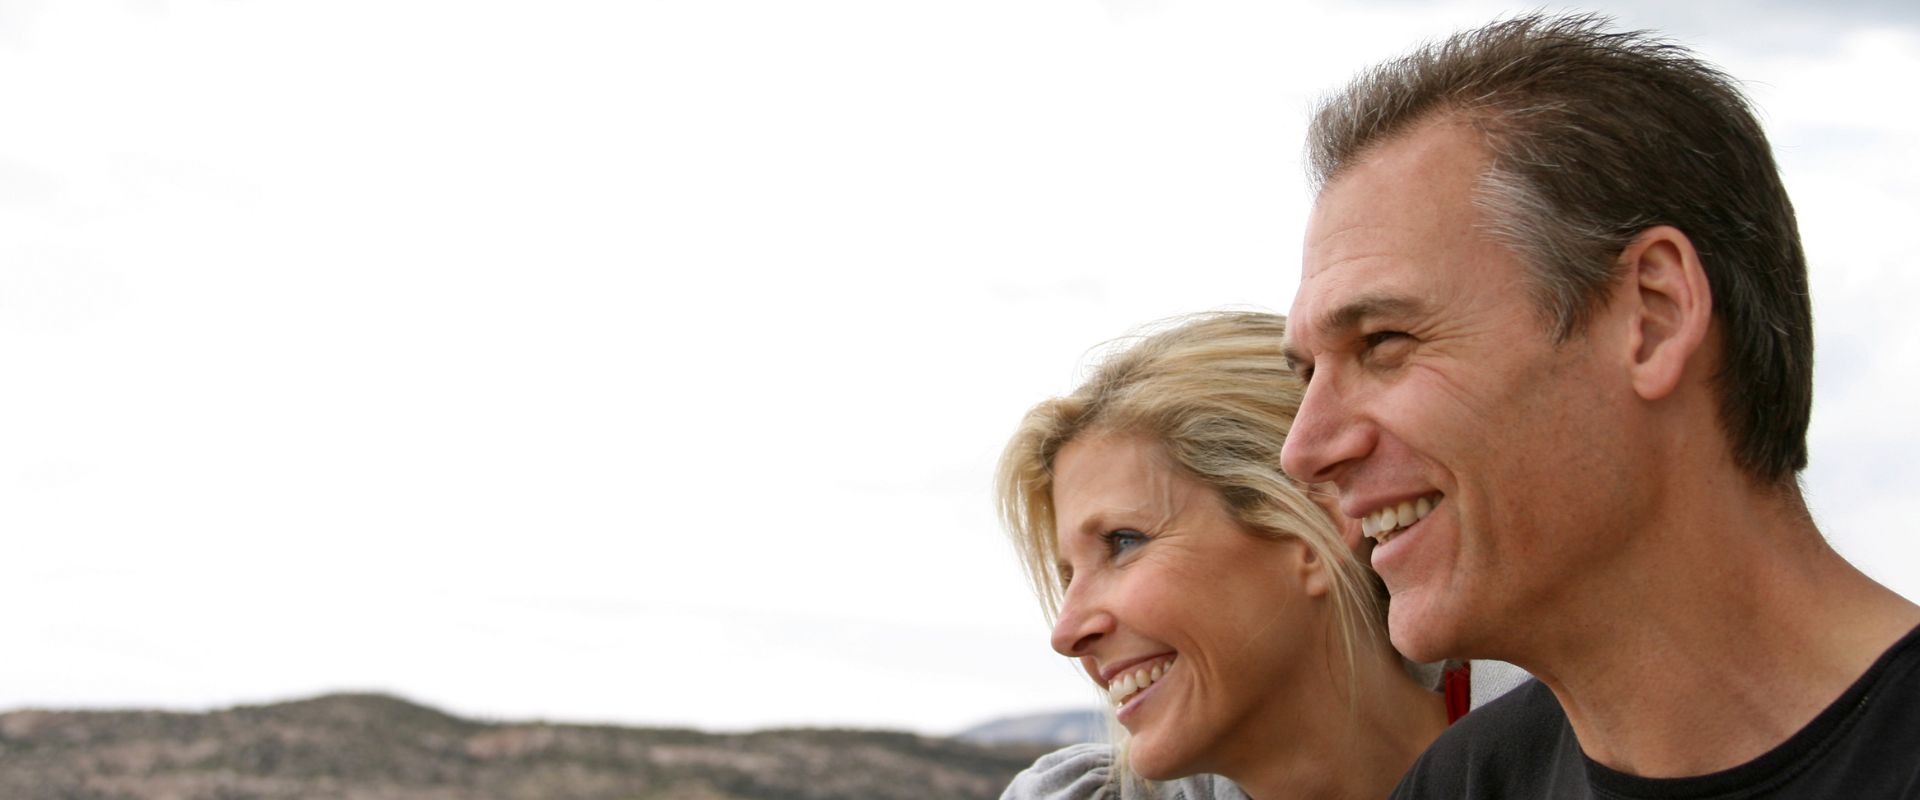 couple stares out over valley and debates veneers vs Invisalign